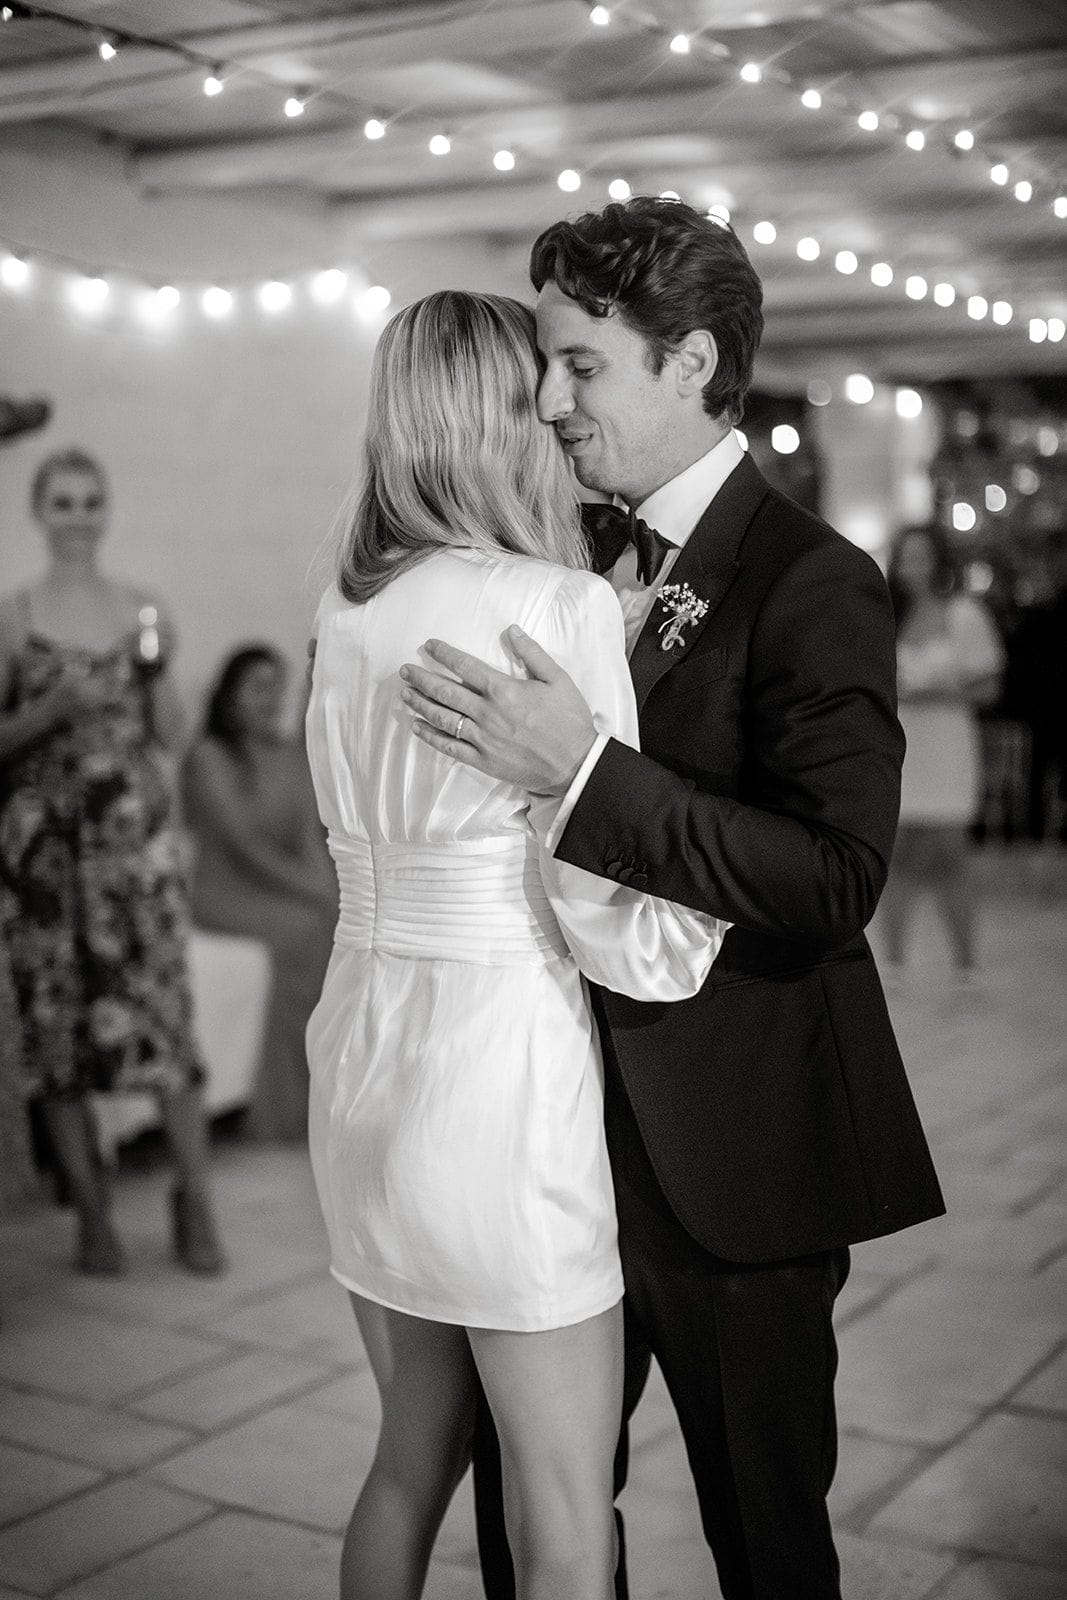 Bride and groom share first dance at wedding reception